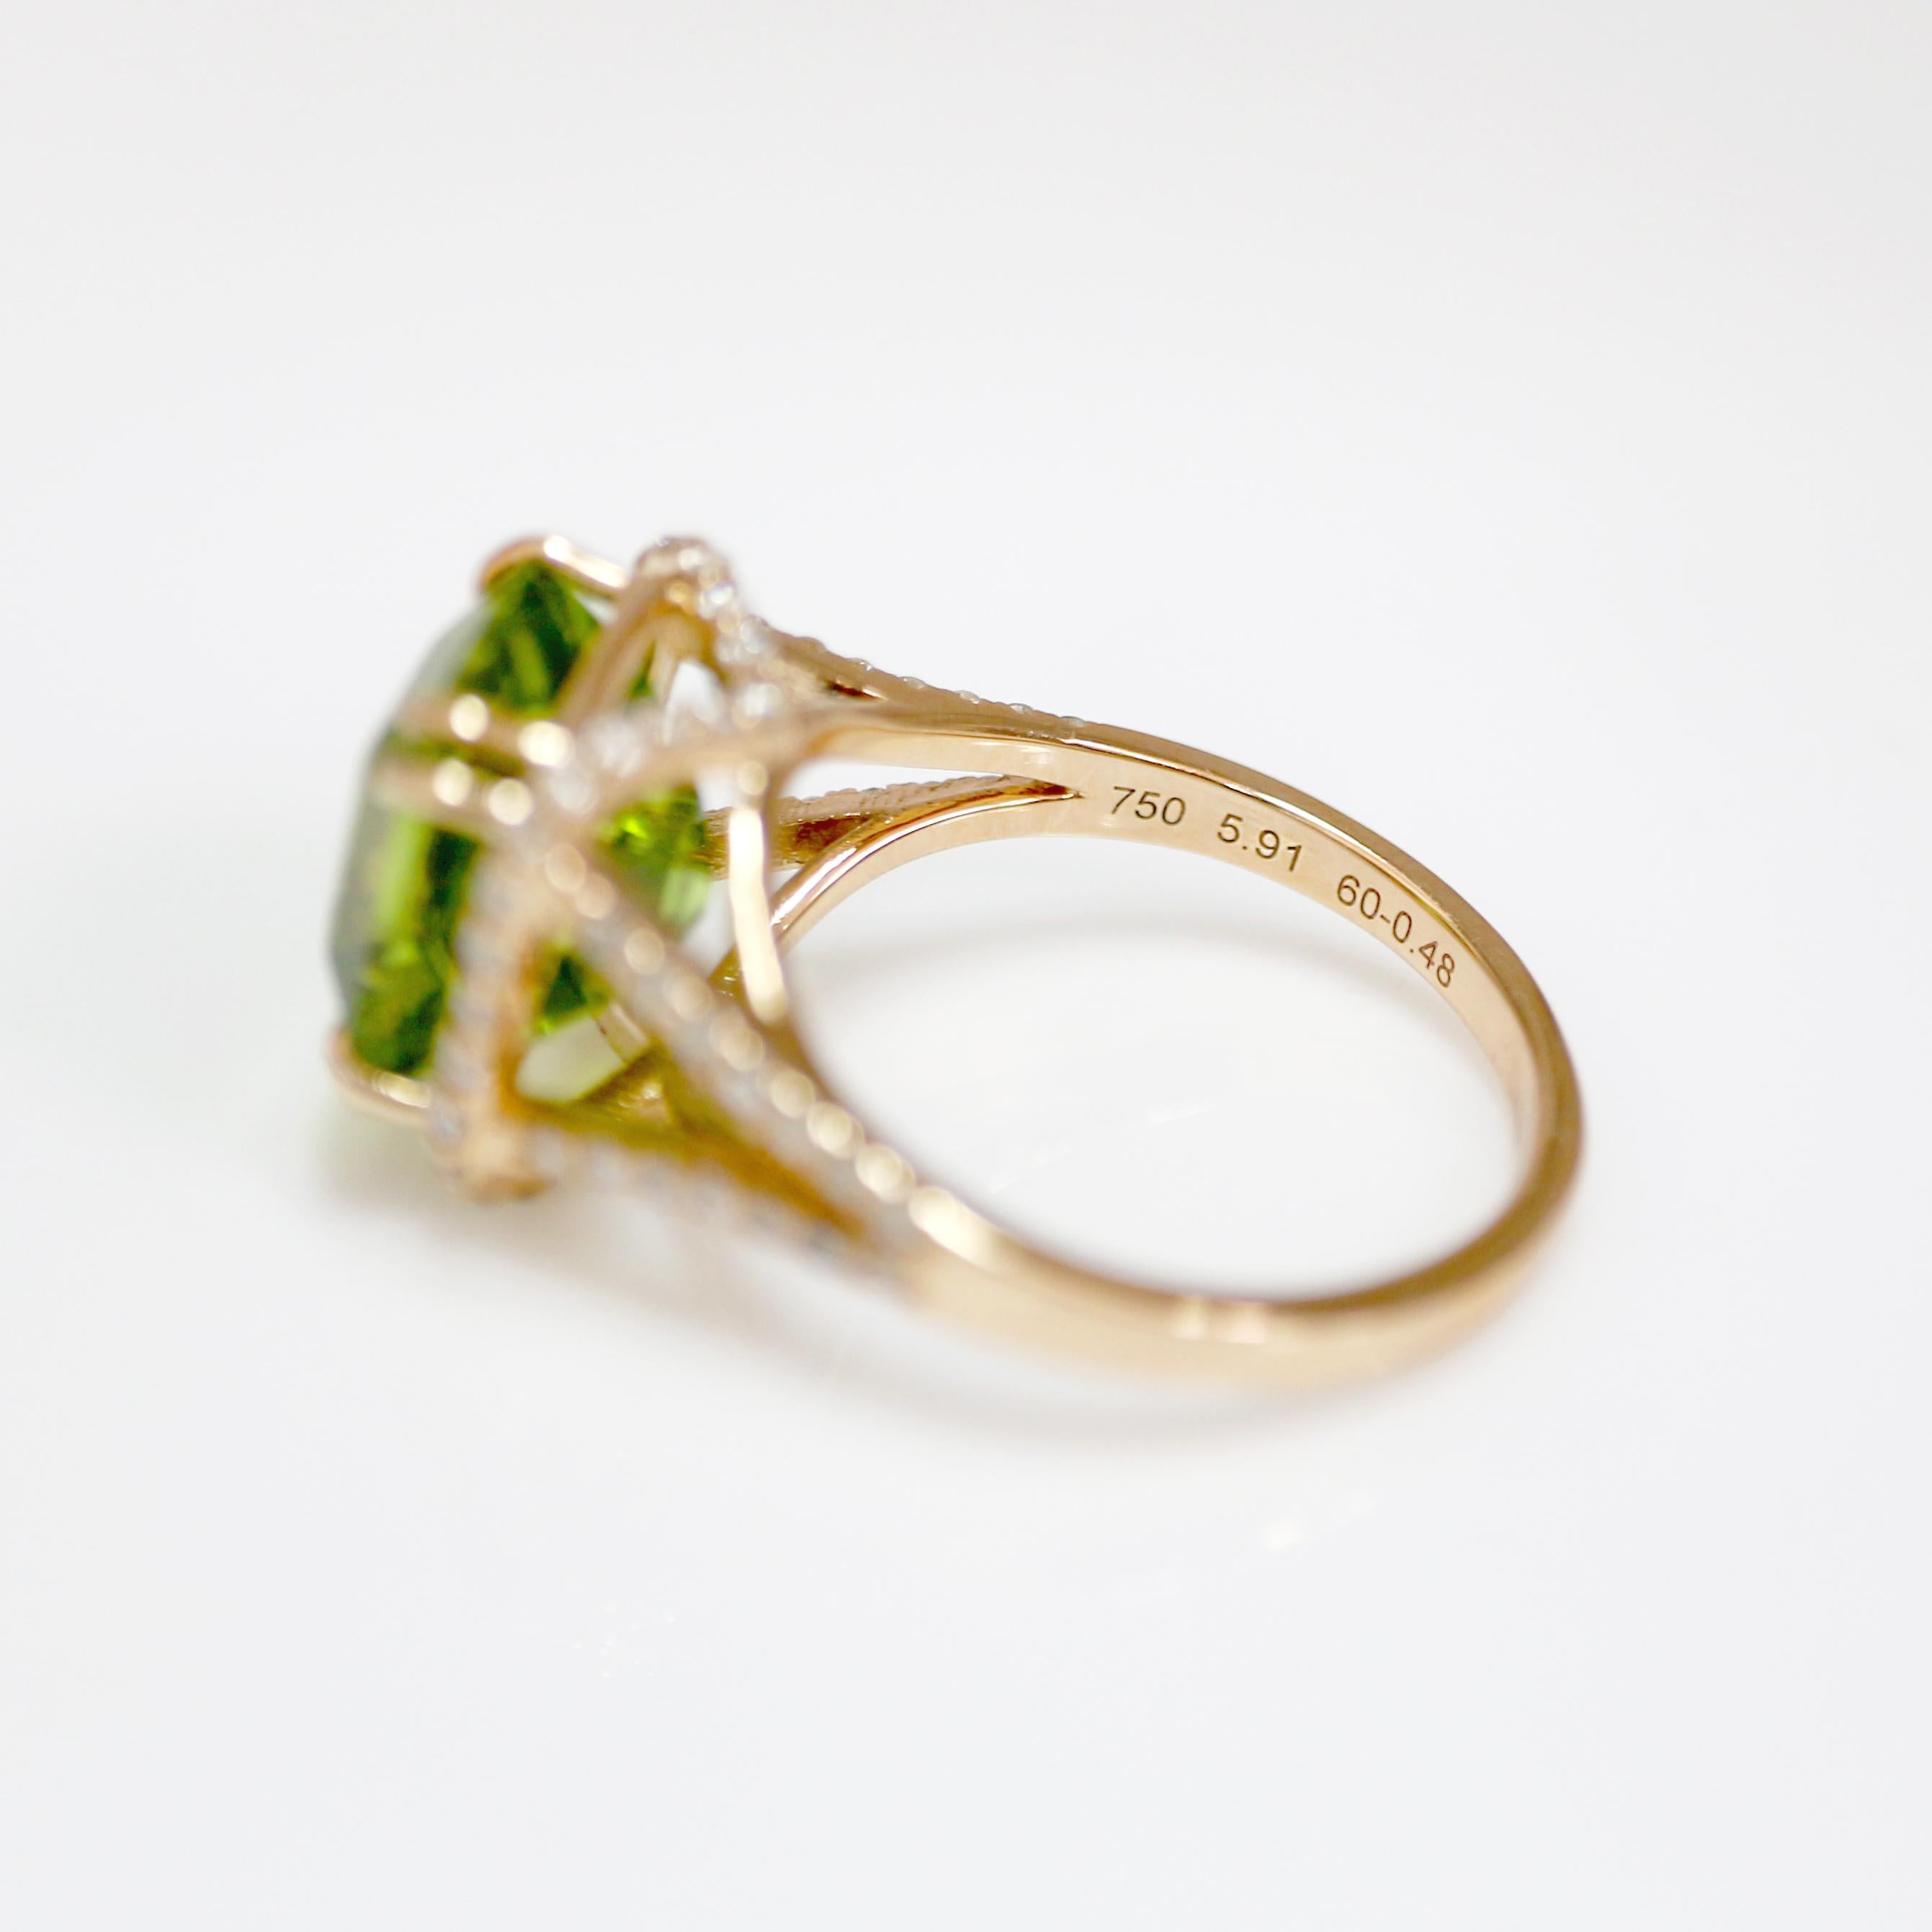 IGI 18k 5.91ct Top Vivid Peridot&Diamond Antique Art Deco Style Engagement Ring In New Condition For Sale In Kaohsiung City, TW